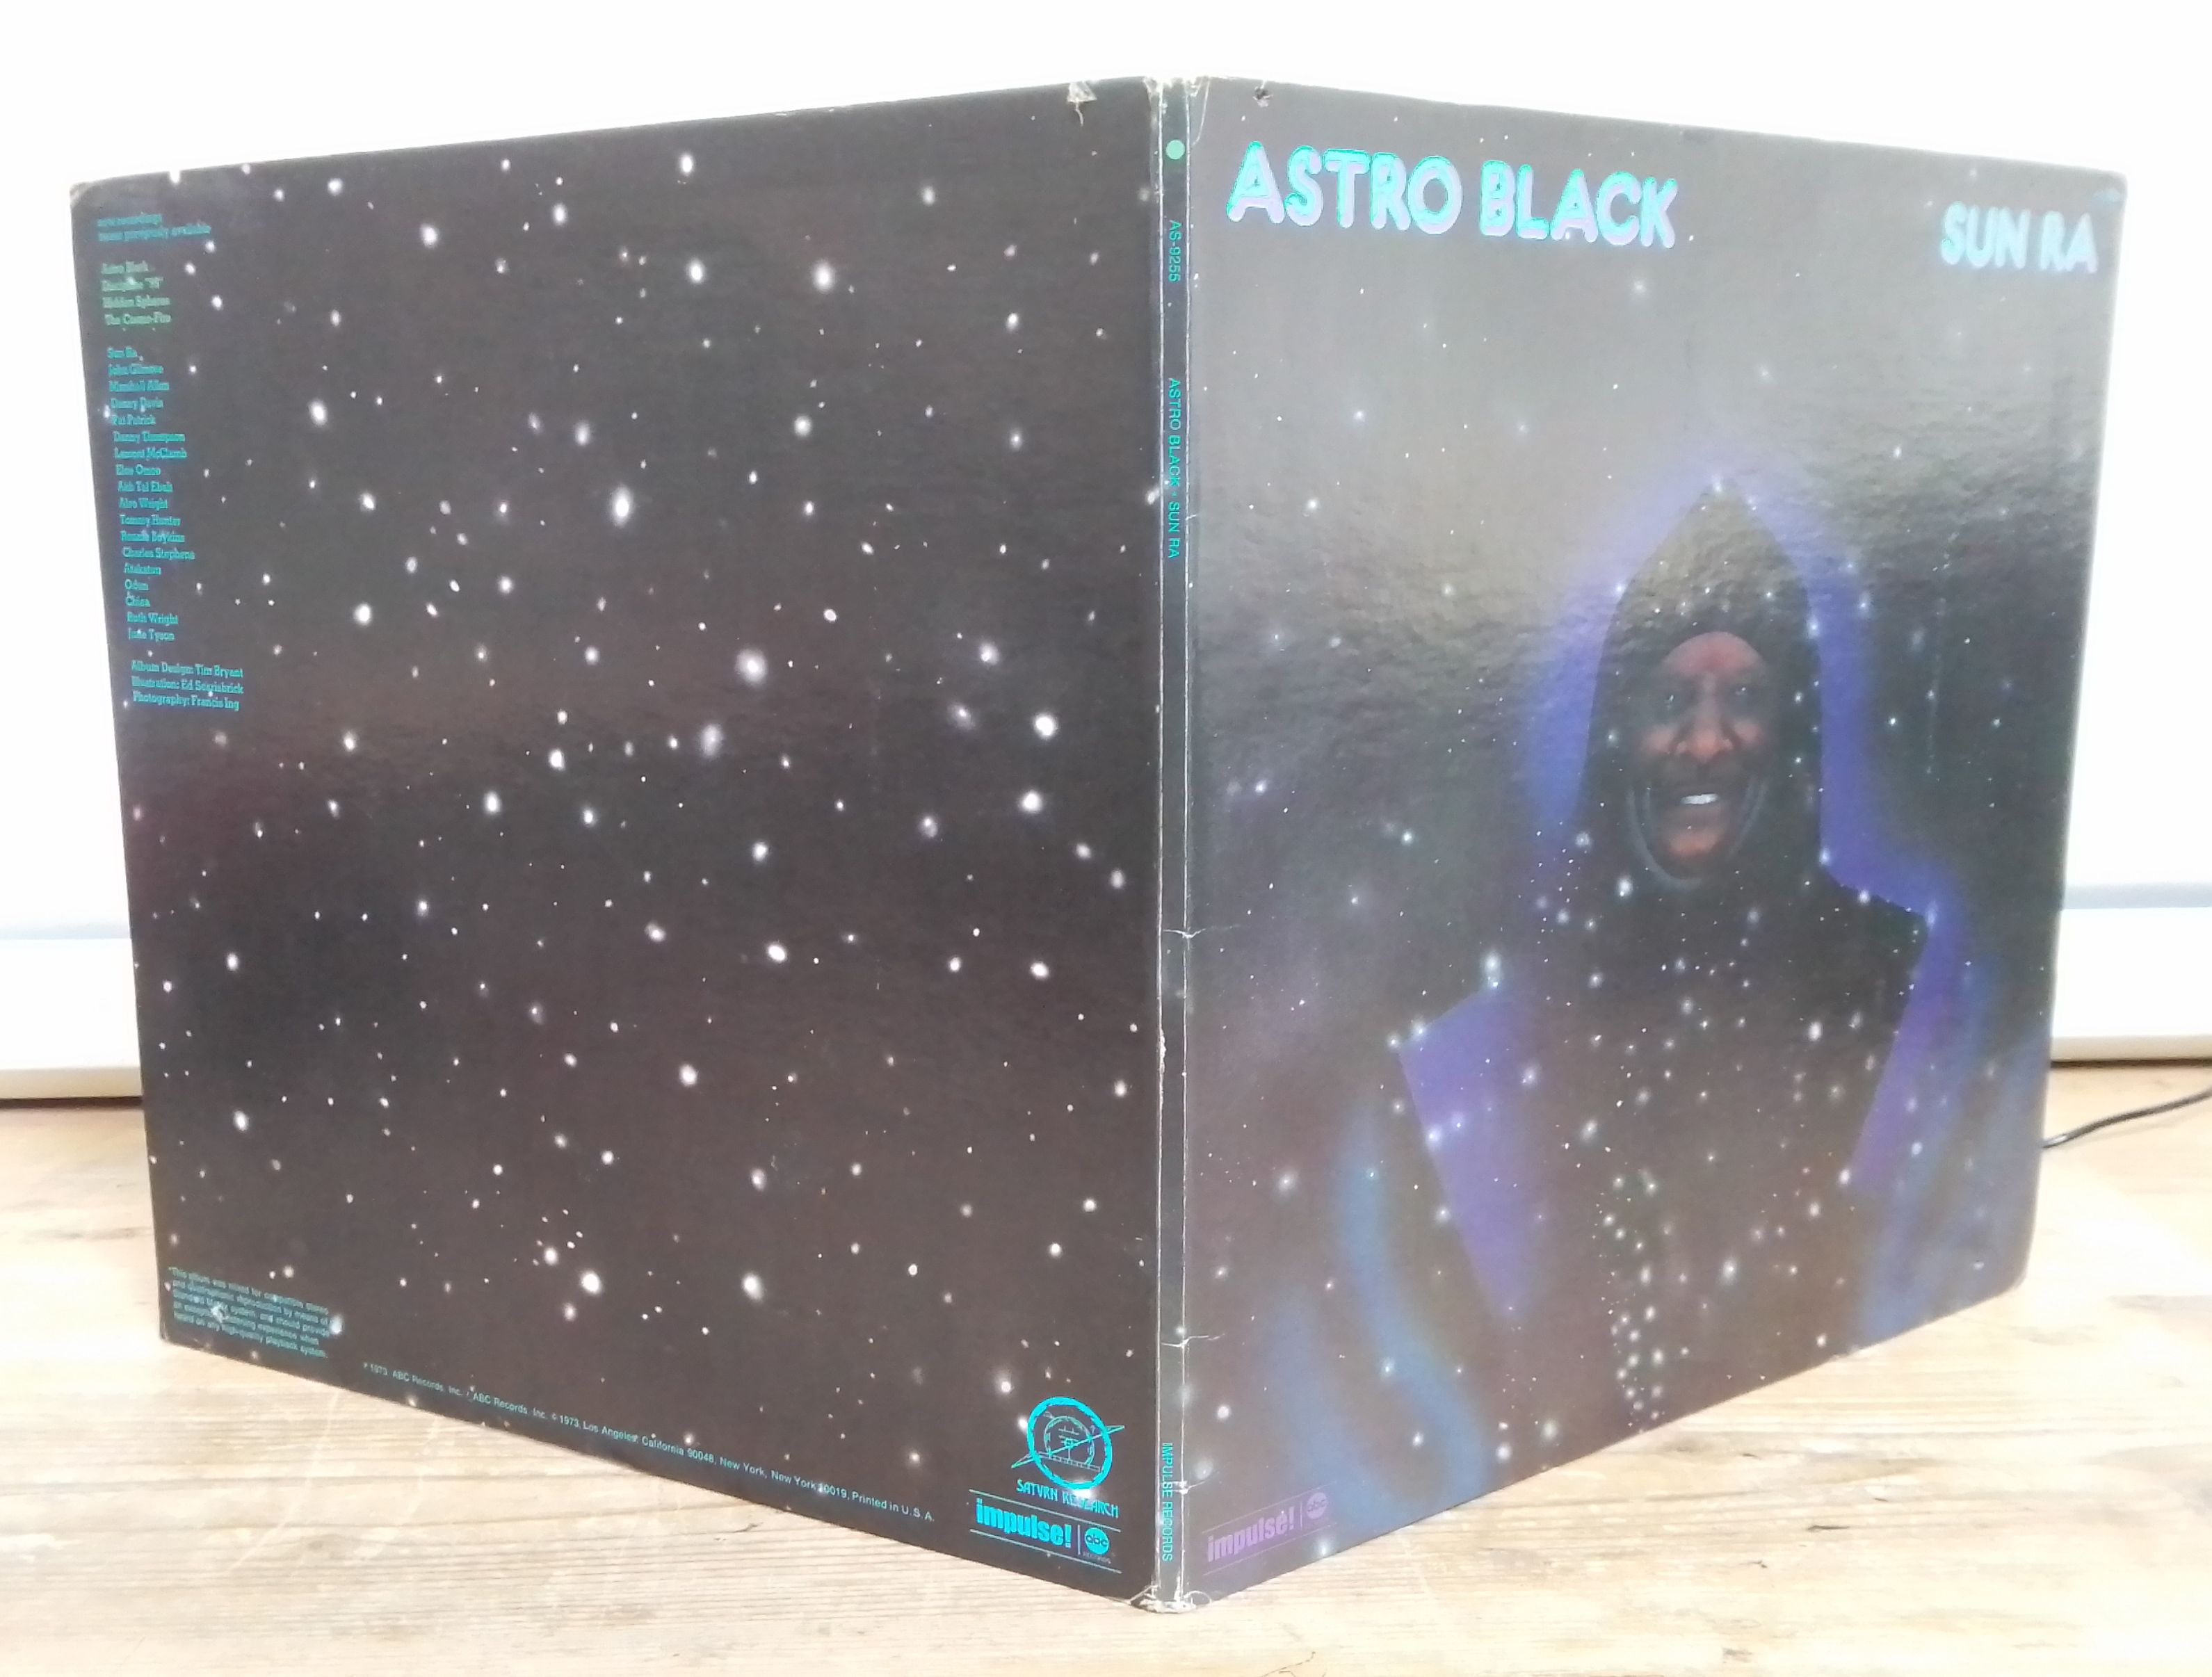 Two Sun Ra LPs: Astro Black, gatefold stereo LP, US 1973, Impulse AS-9255 and The Heliocentric - Image 3 of 8